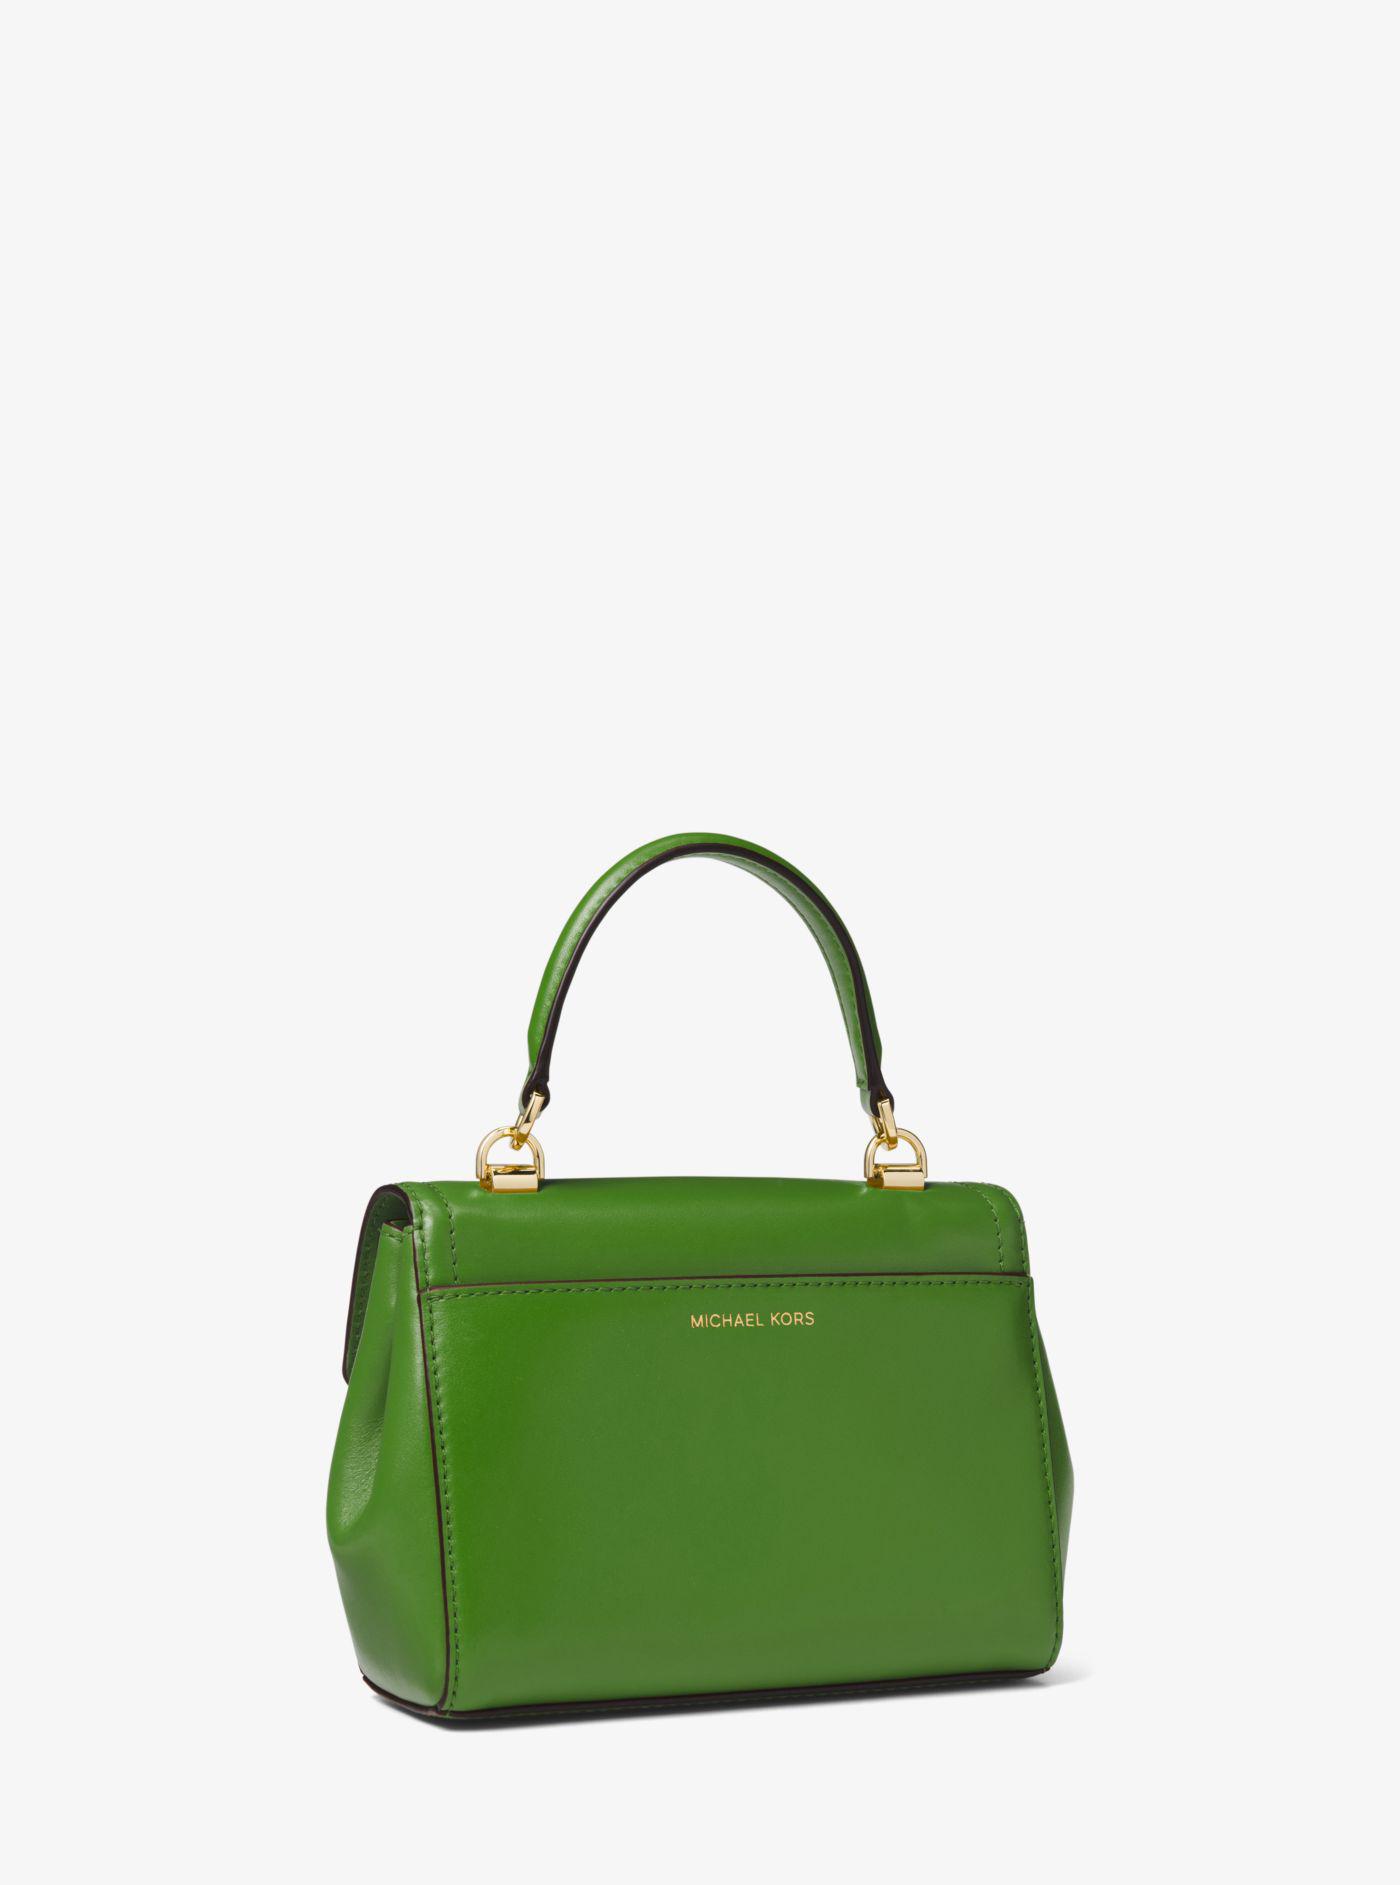 Michael Kors Ava Extra-small Leather Crossbody Bag in Green - Lyst